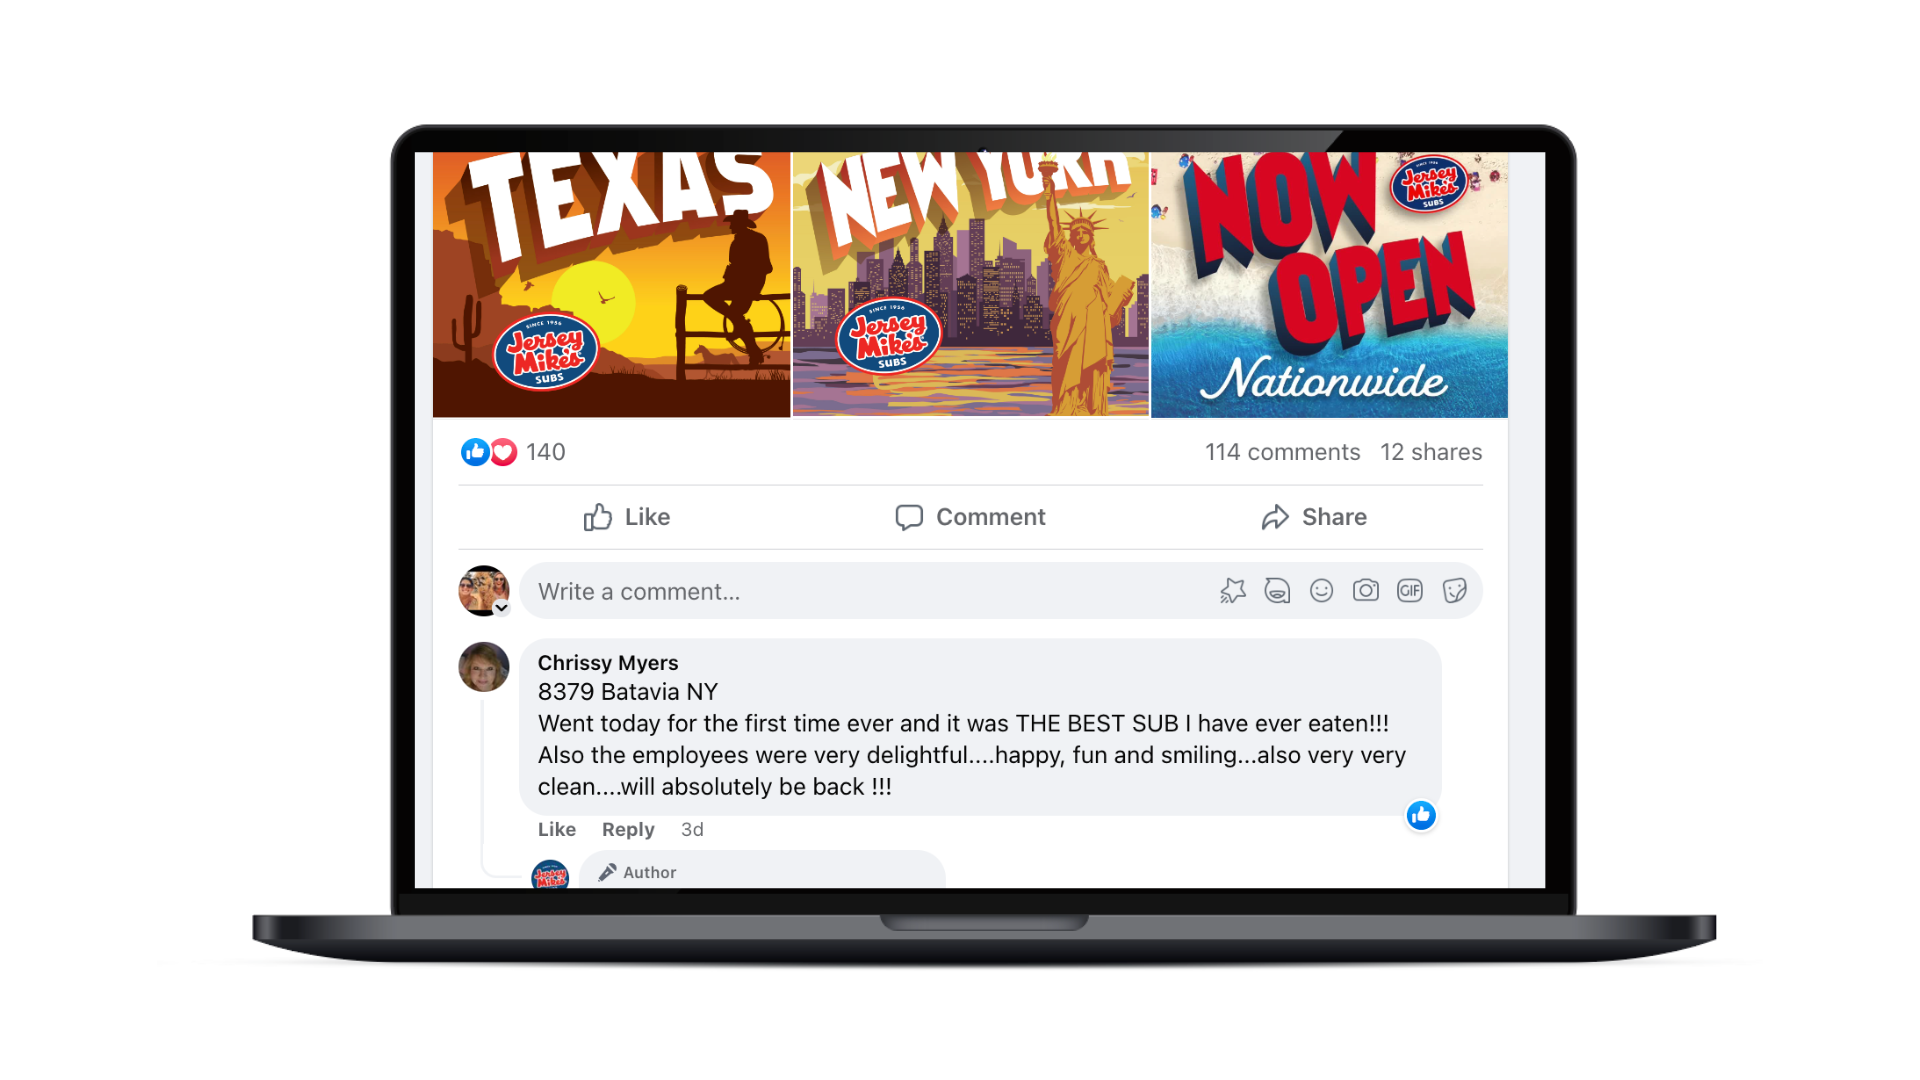 An example of positive feedback Jersey Mike's Subs received on a social media post